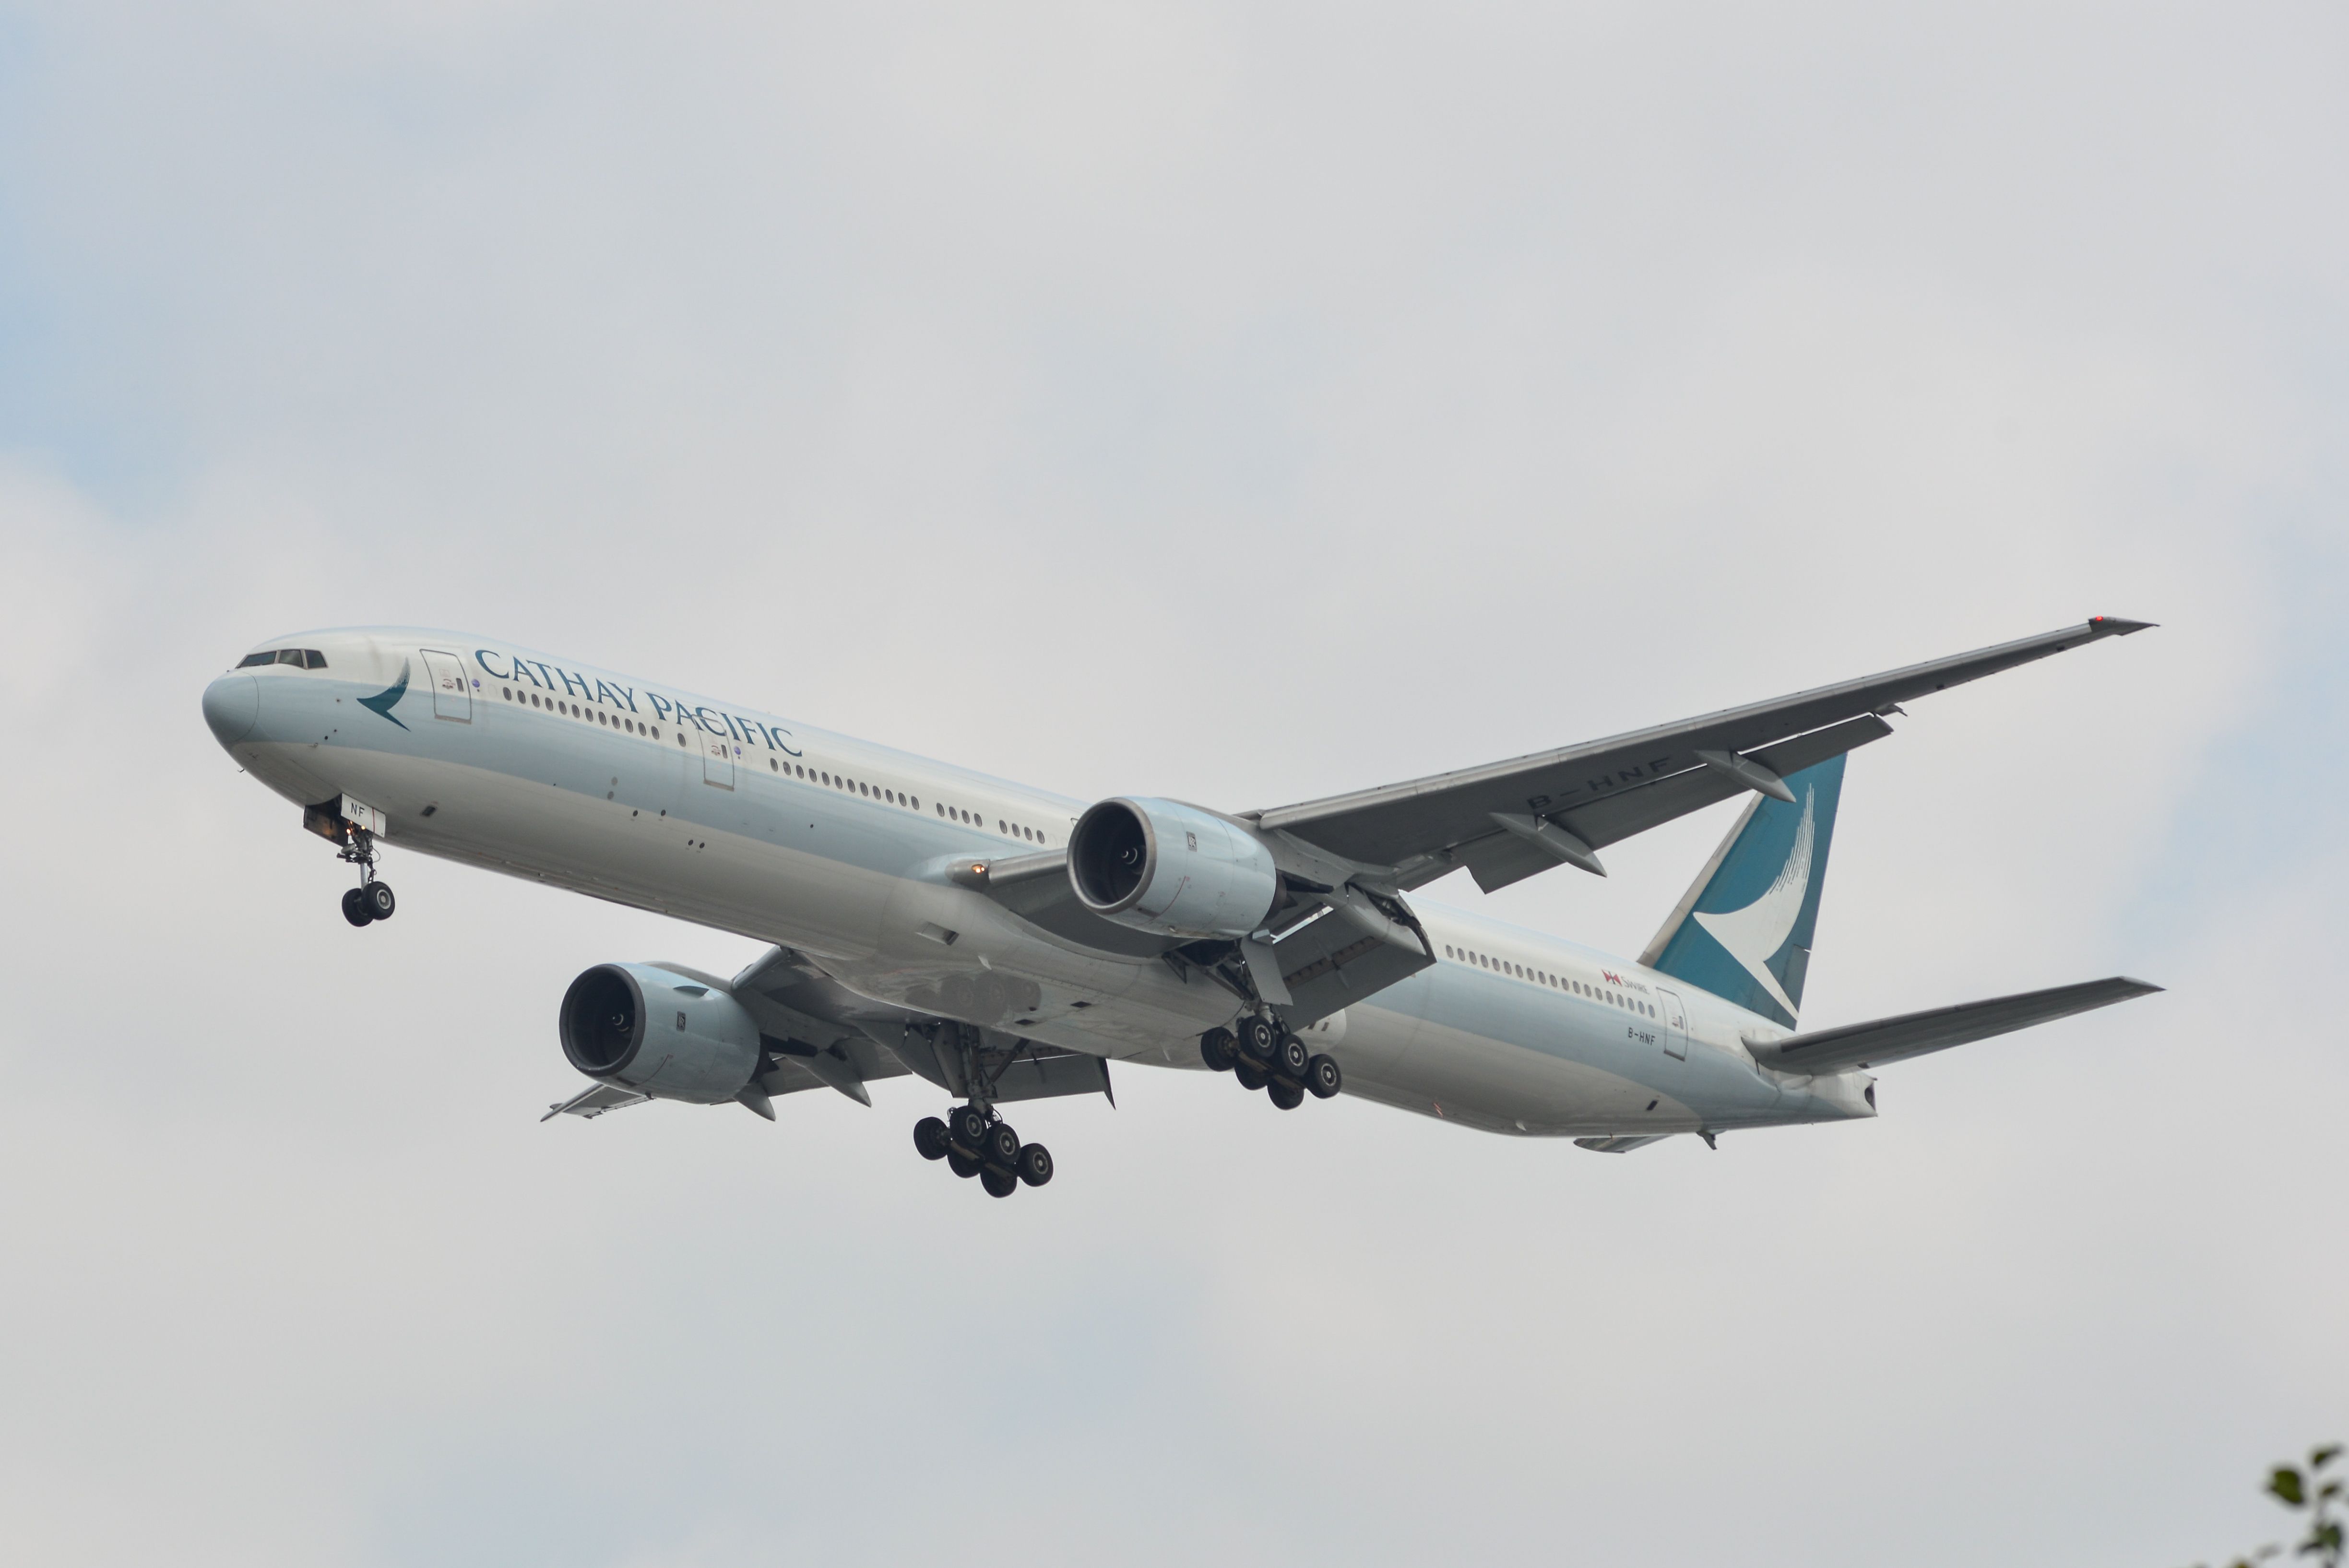 Cathay Pacific Boeing 777-300 landing at Tan Son Nhat Airport.